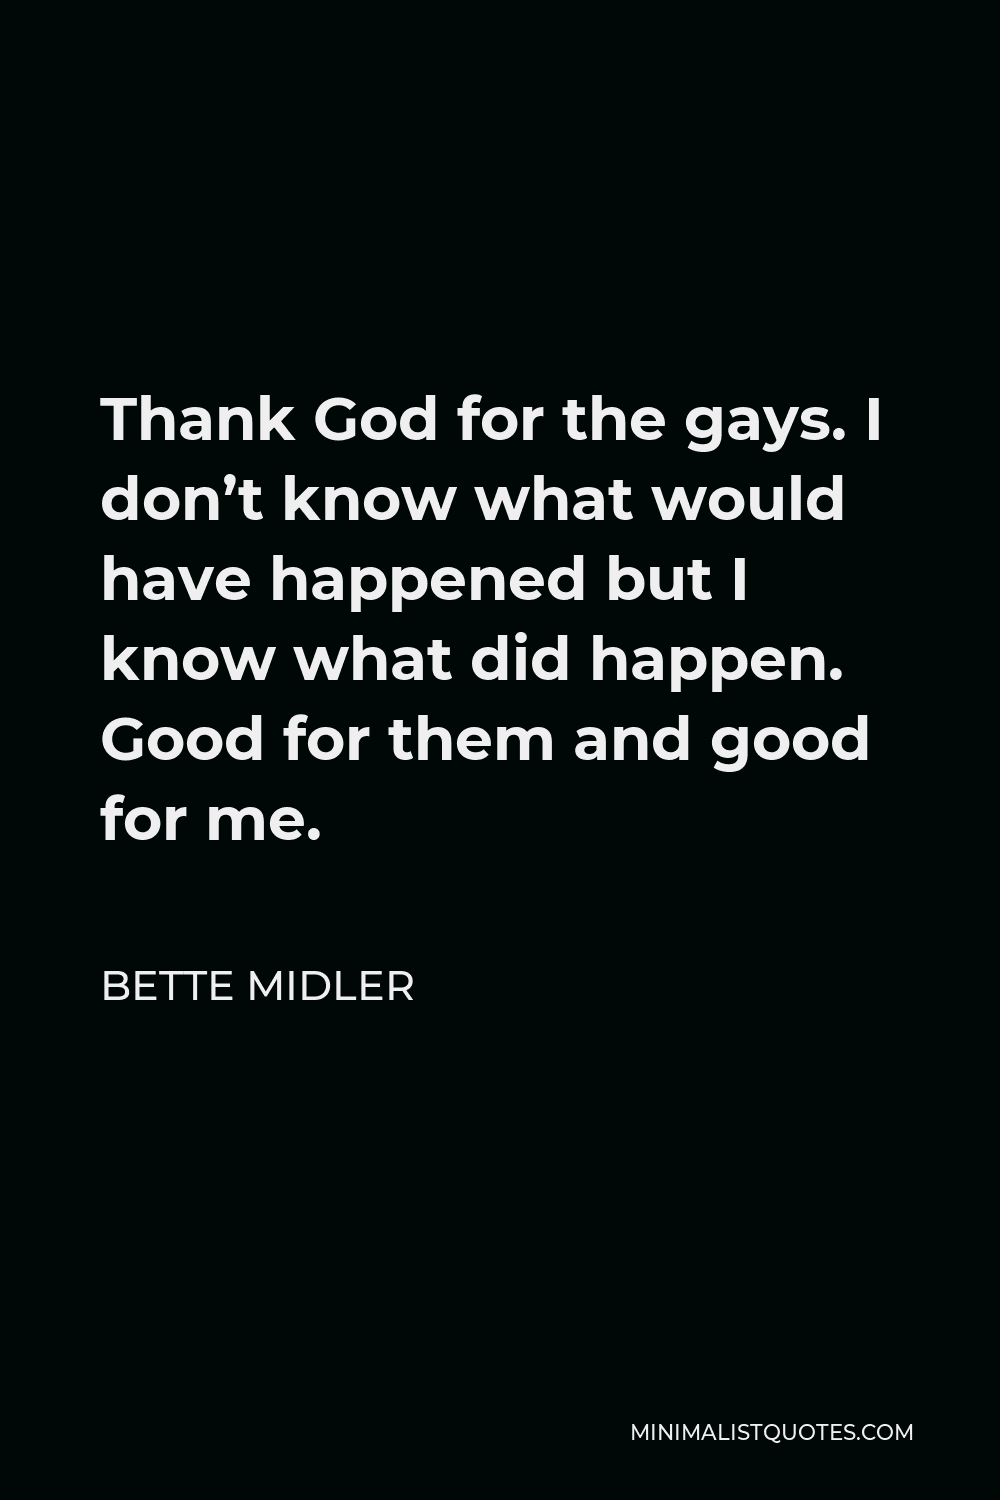 Bette Midler Quote - Thank God for the gays. I don’t know what would have happened but I know what did happen. Good for them and good for me.